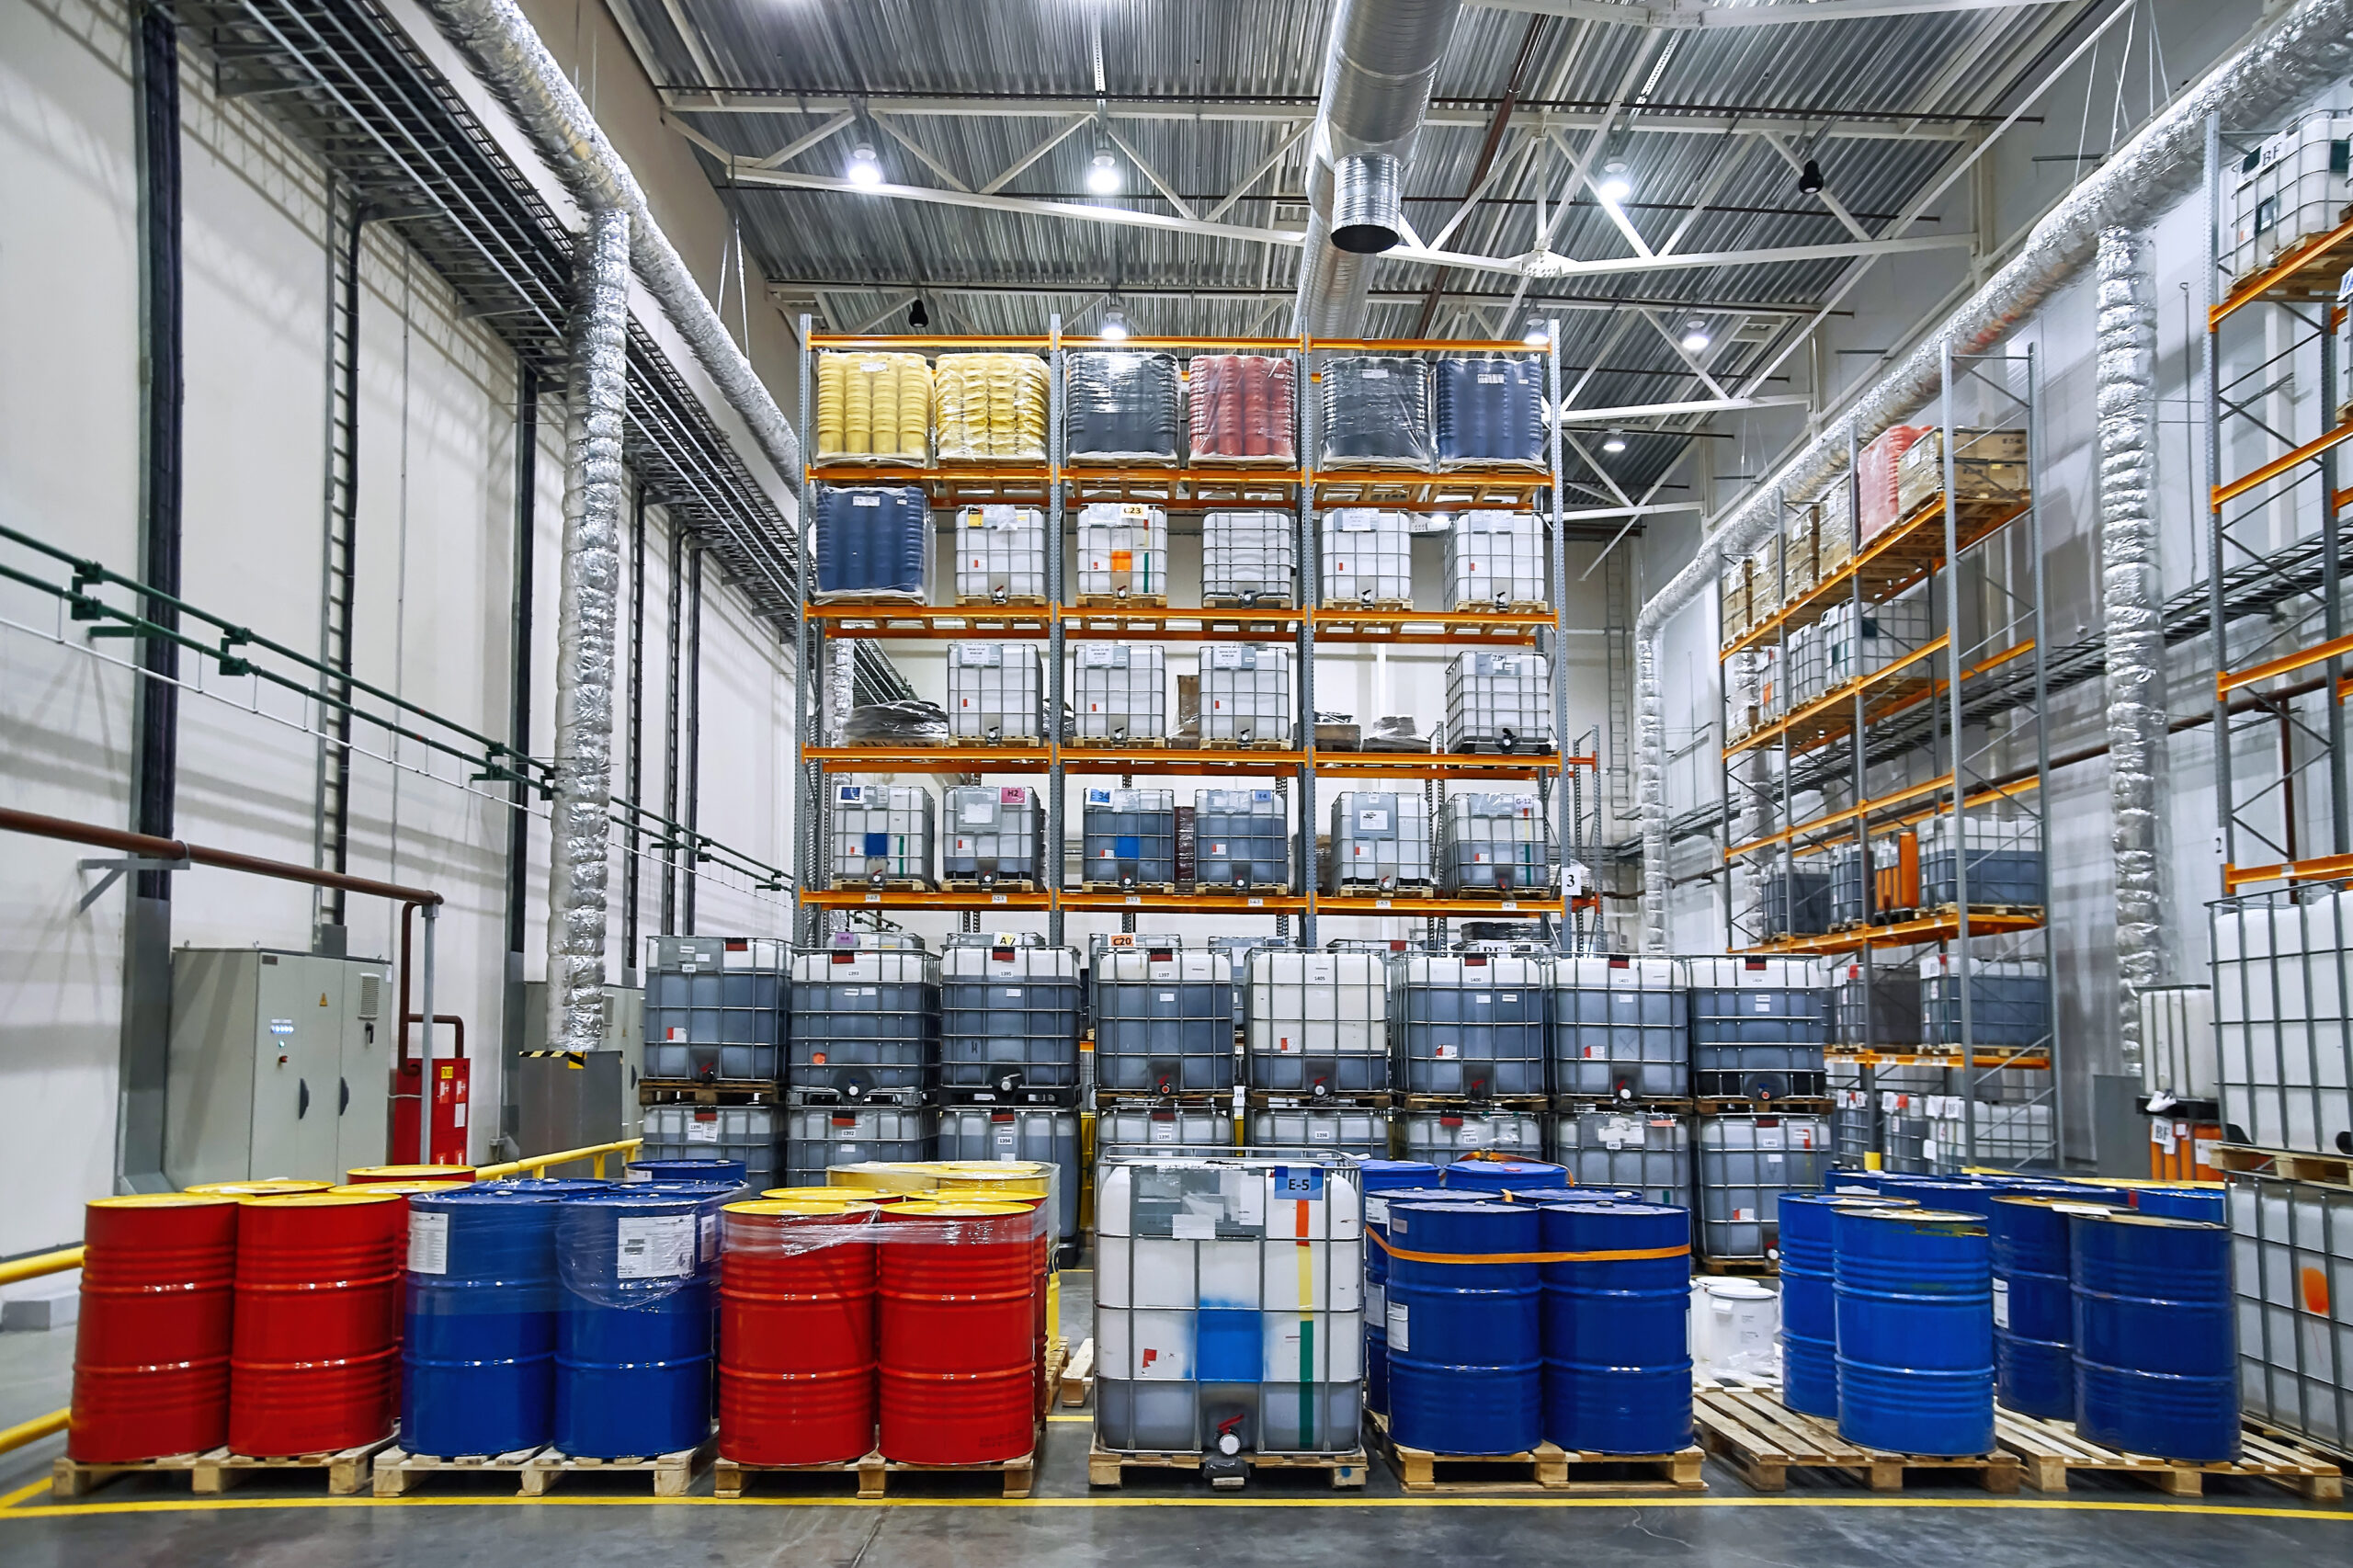 Chemical Storage: Oil drums and plastic container on pallets in a warehouse on metal shelving. Handling and storing industrial lubricants.